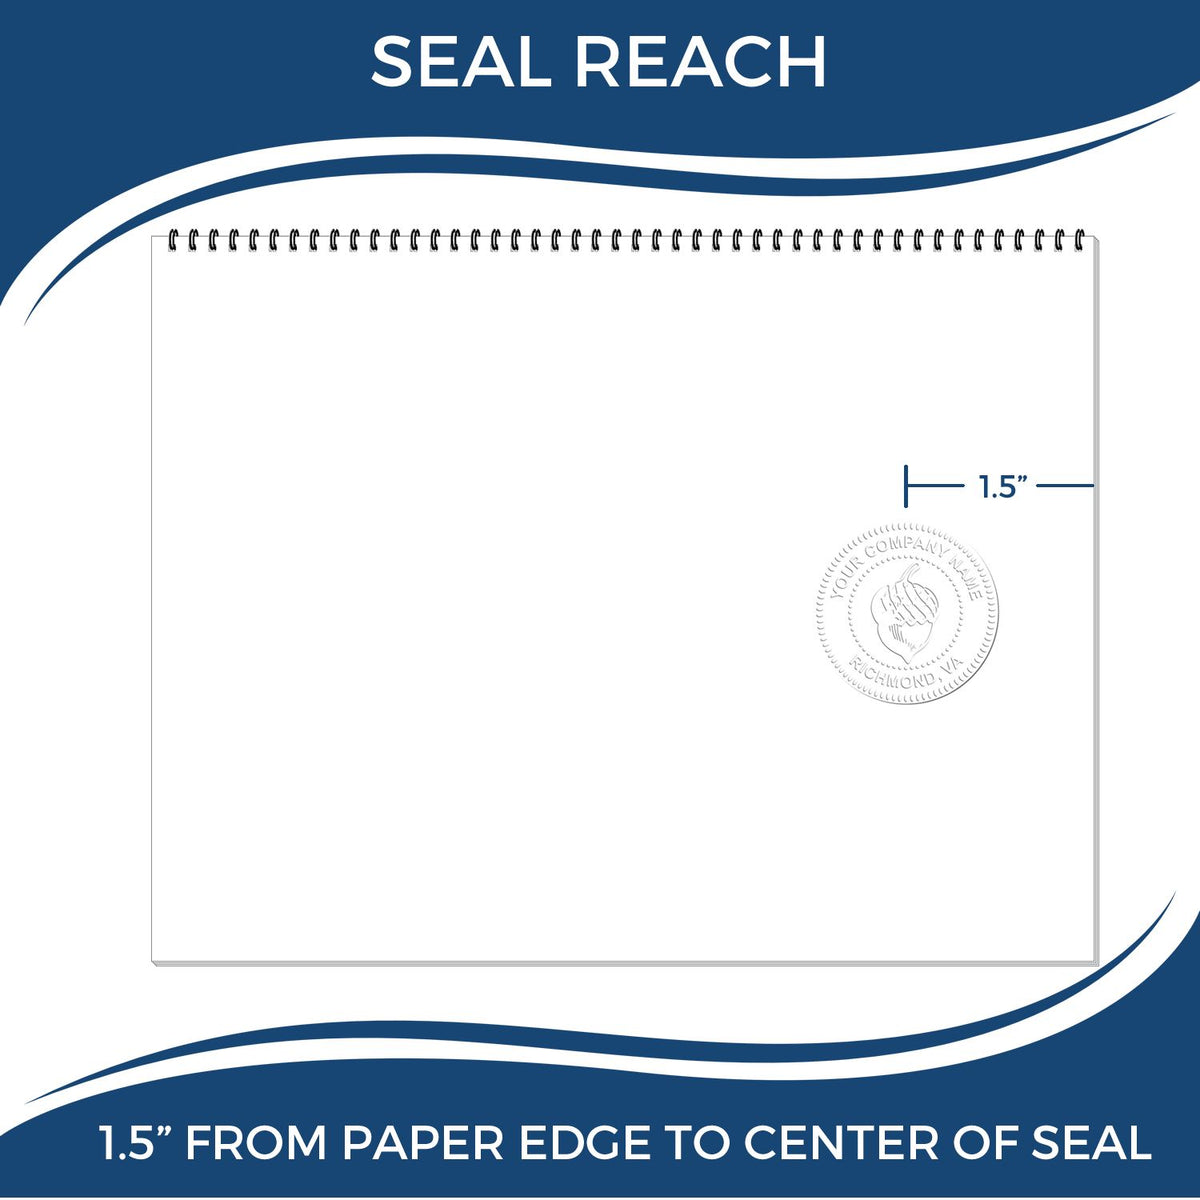 An infographic showing the seal reach which is represented by a ruler and a miniature seal image of the Hybrid Colorado Architect Seal